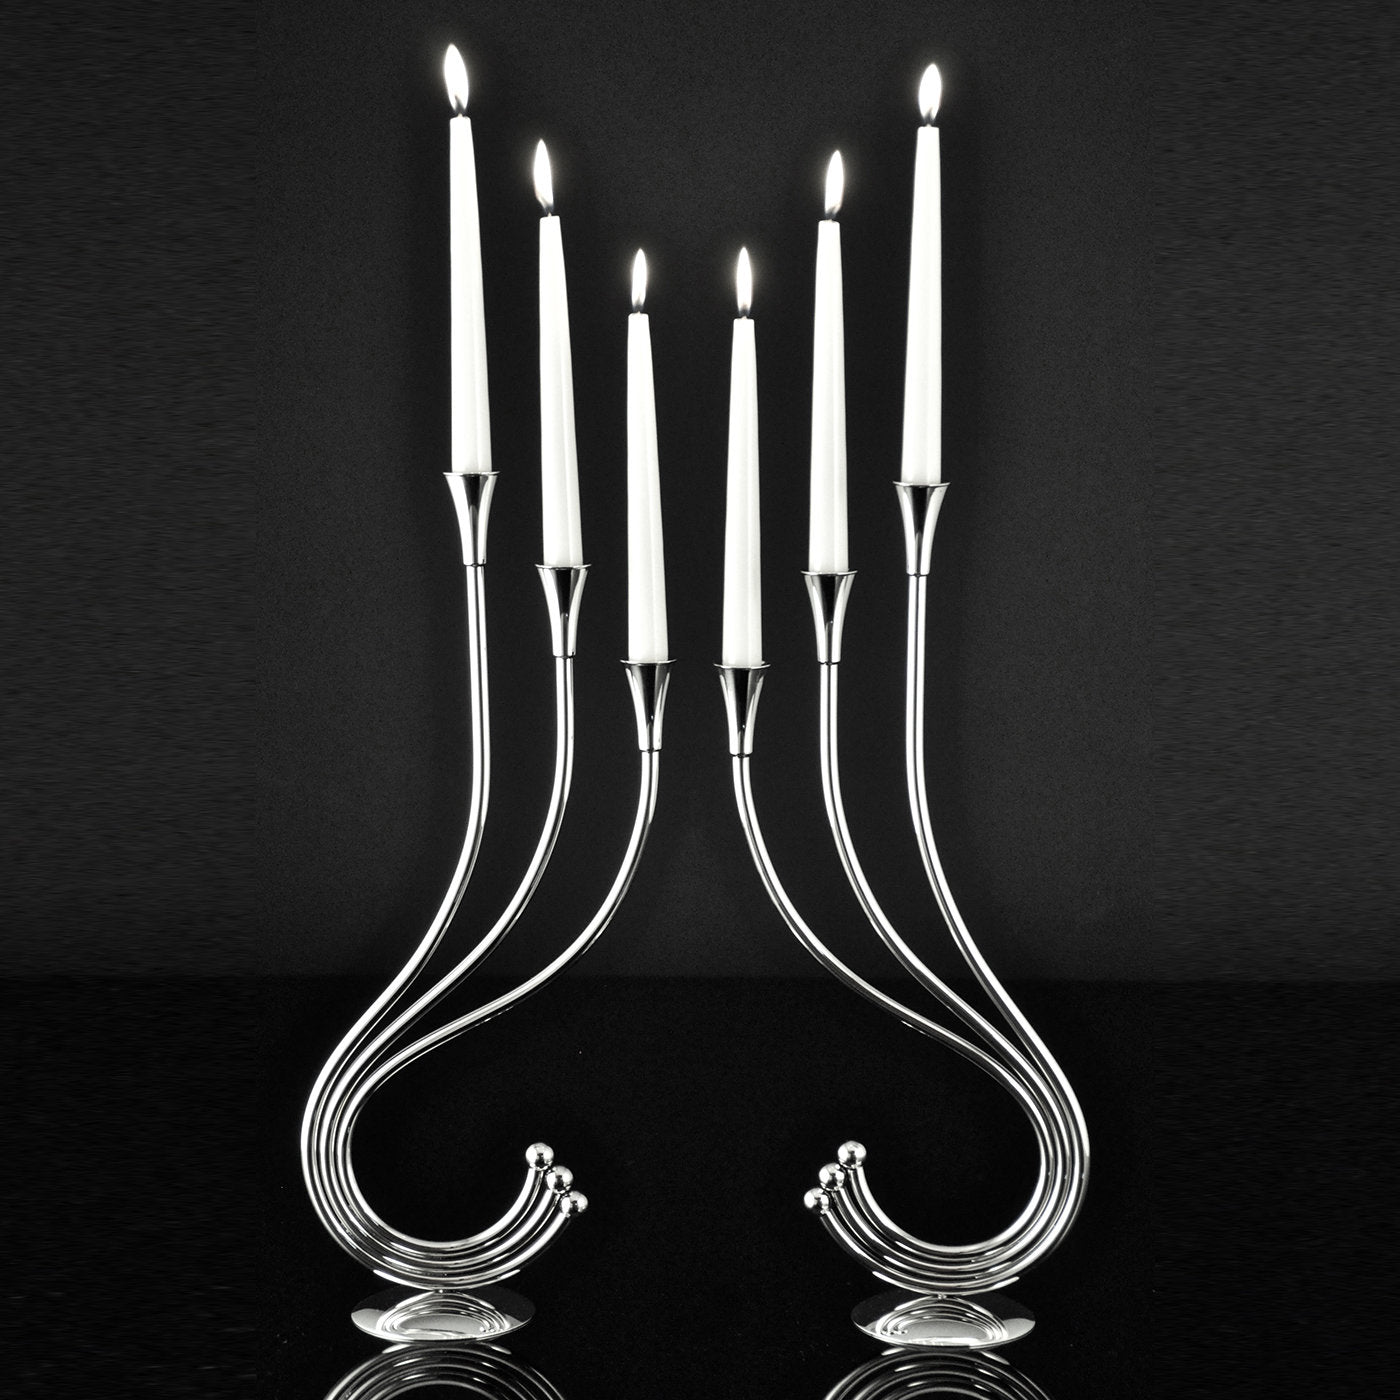 Guanare Three-Flame Candle-Holder - Alternative view 1